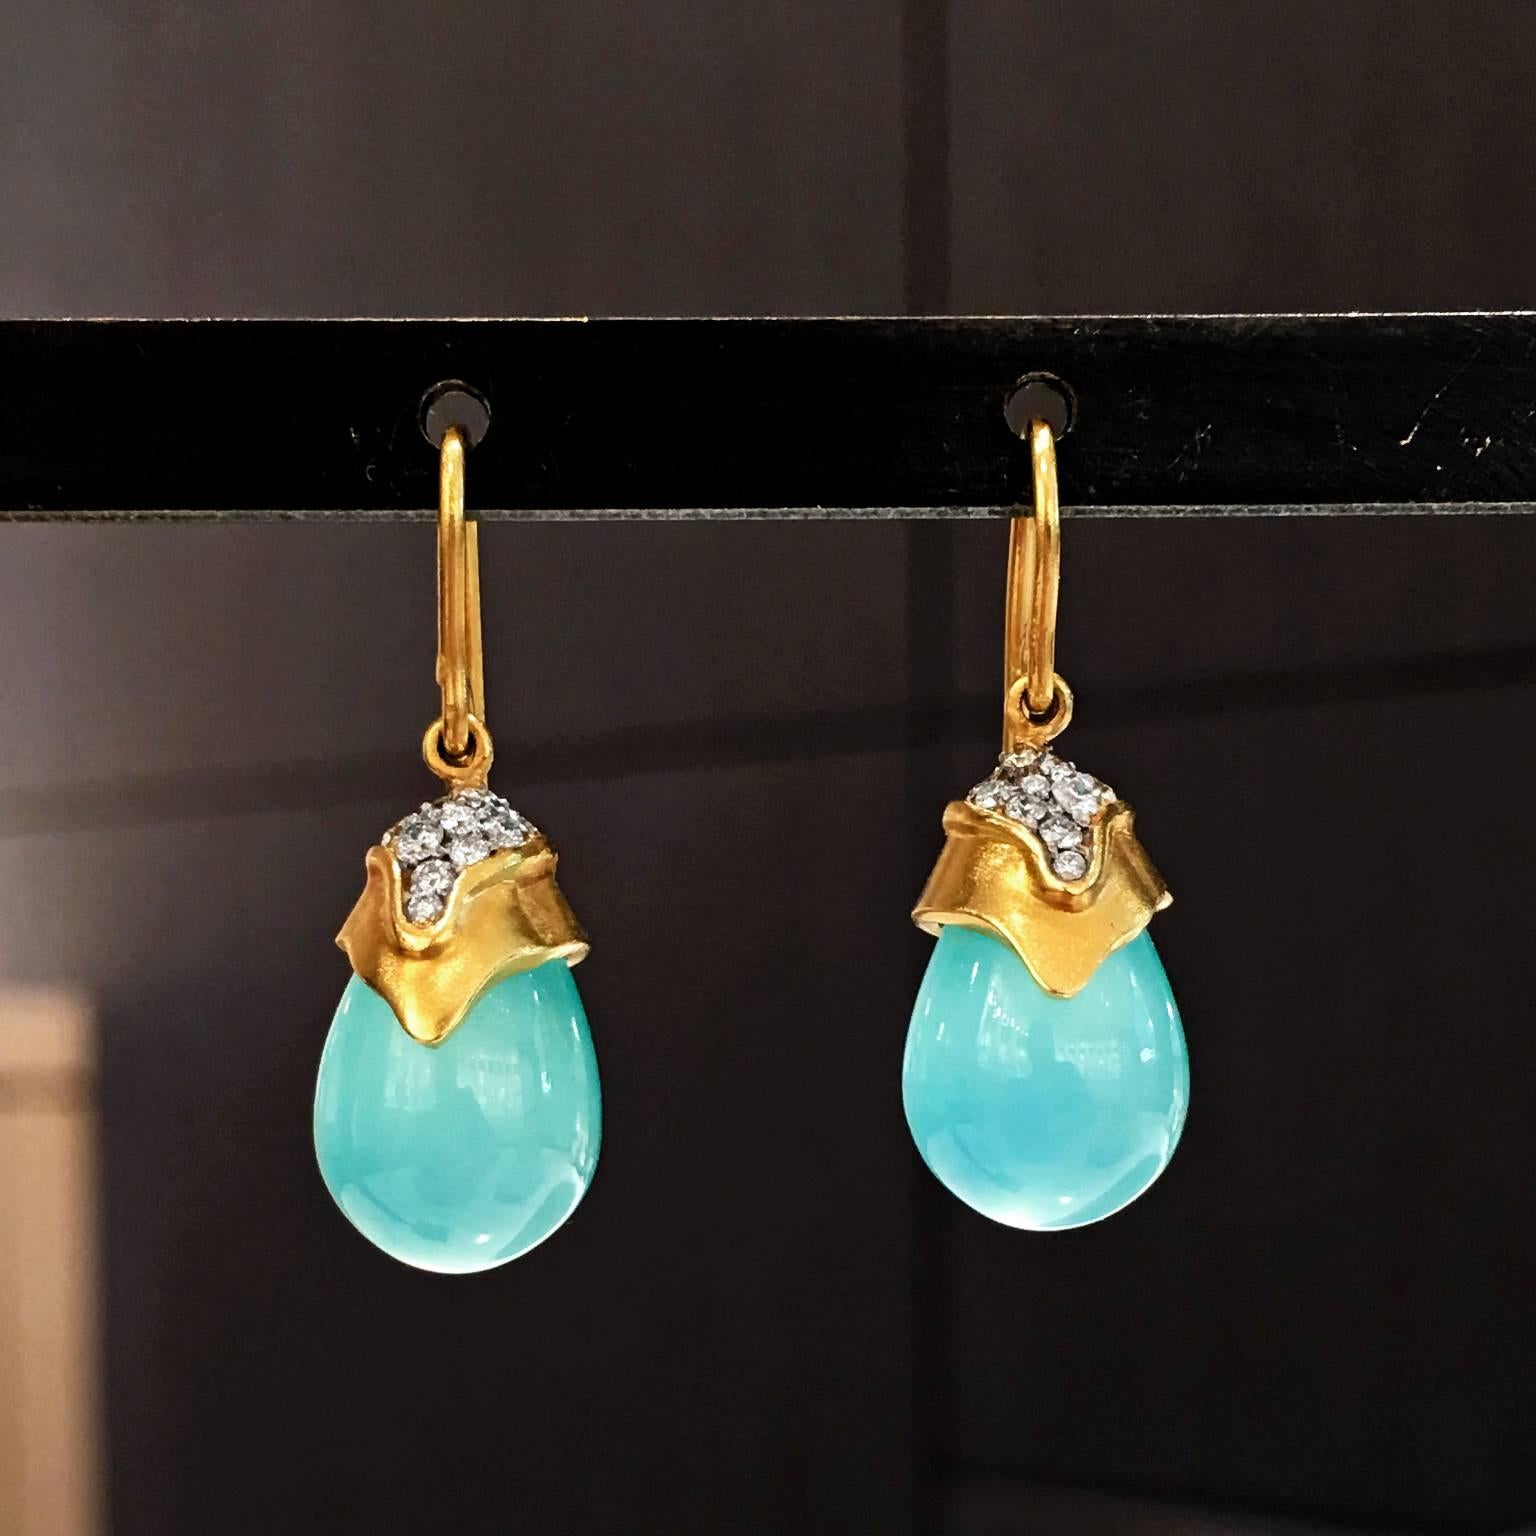 Chalcedony Drop Earrings handmade by jewelry designer Lauren Harper in matte-finished 18k yellow gold with very soft greenish-blue Peruvian chalcedony and 0.41 total carats of round brilliant-cut white dimaond accents on 18k yellow gold ear